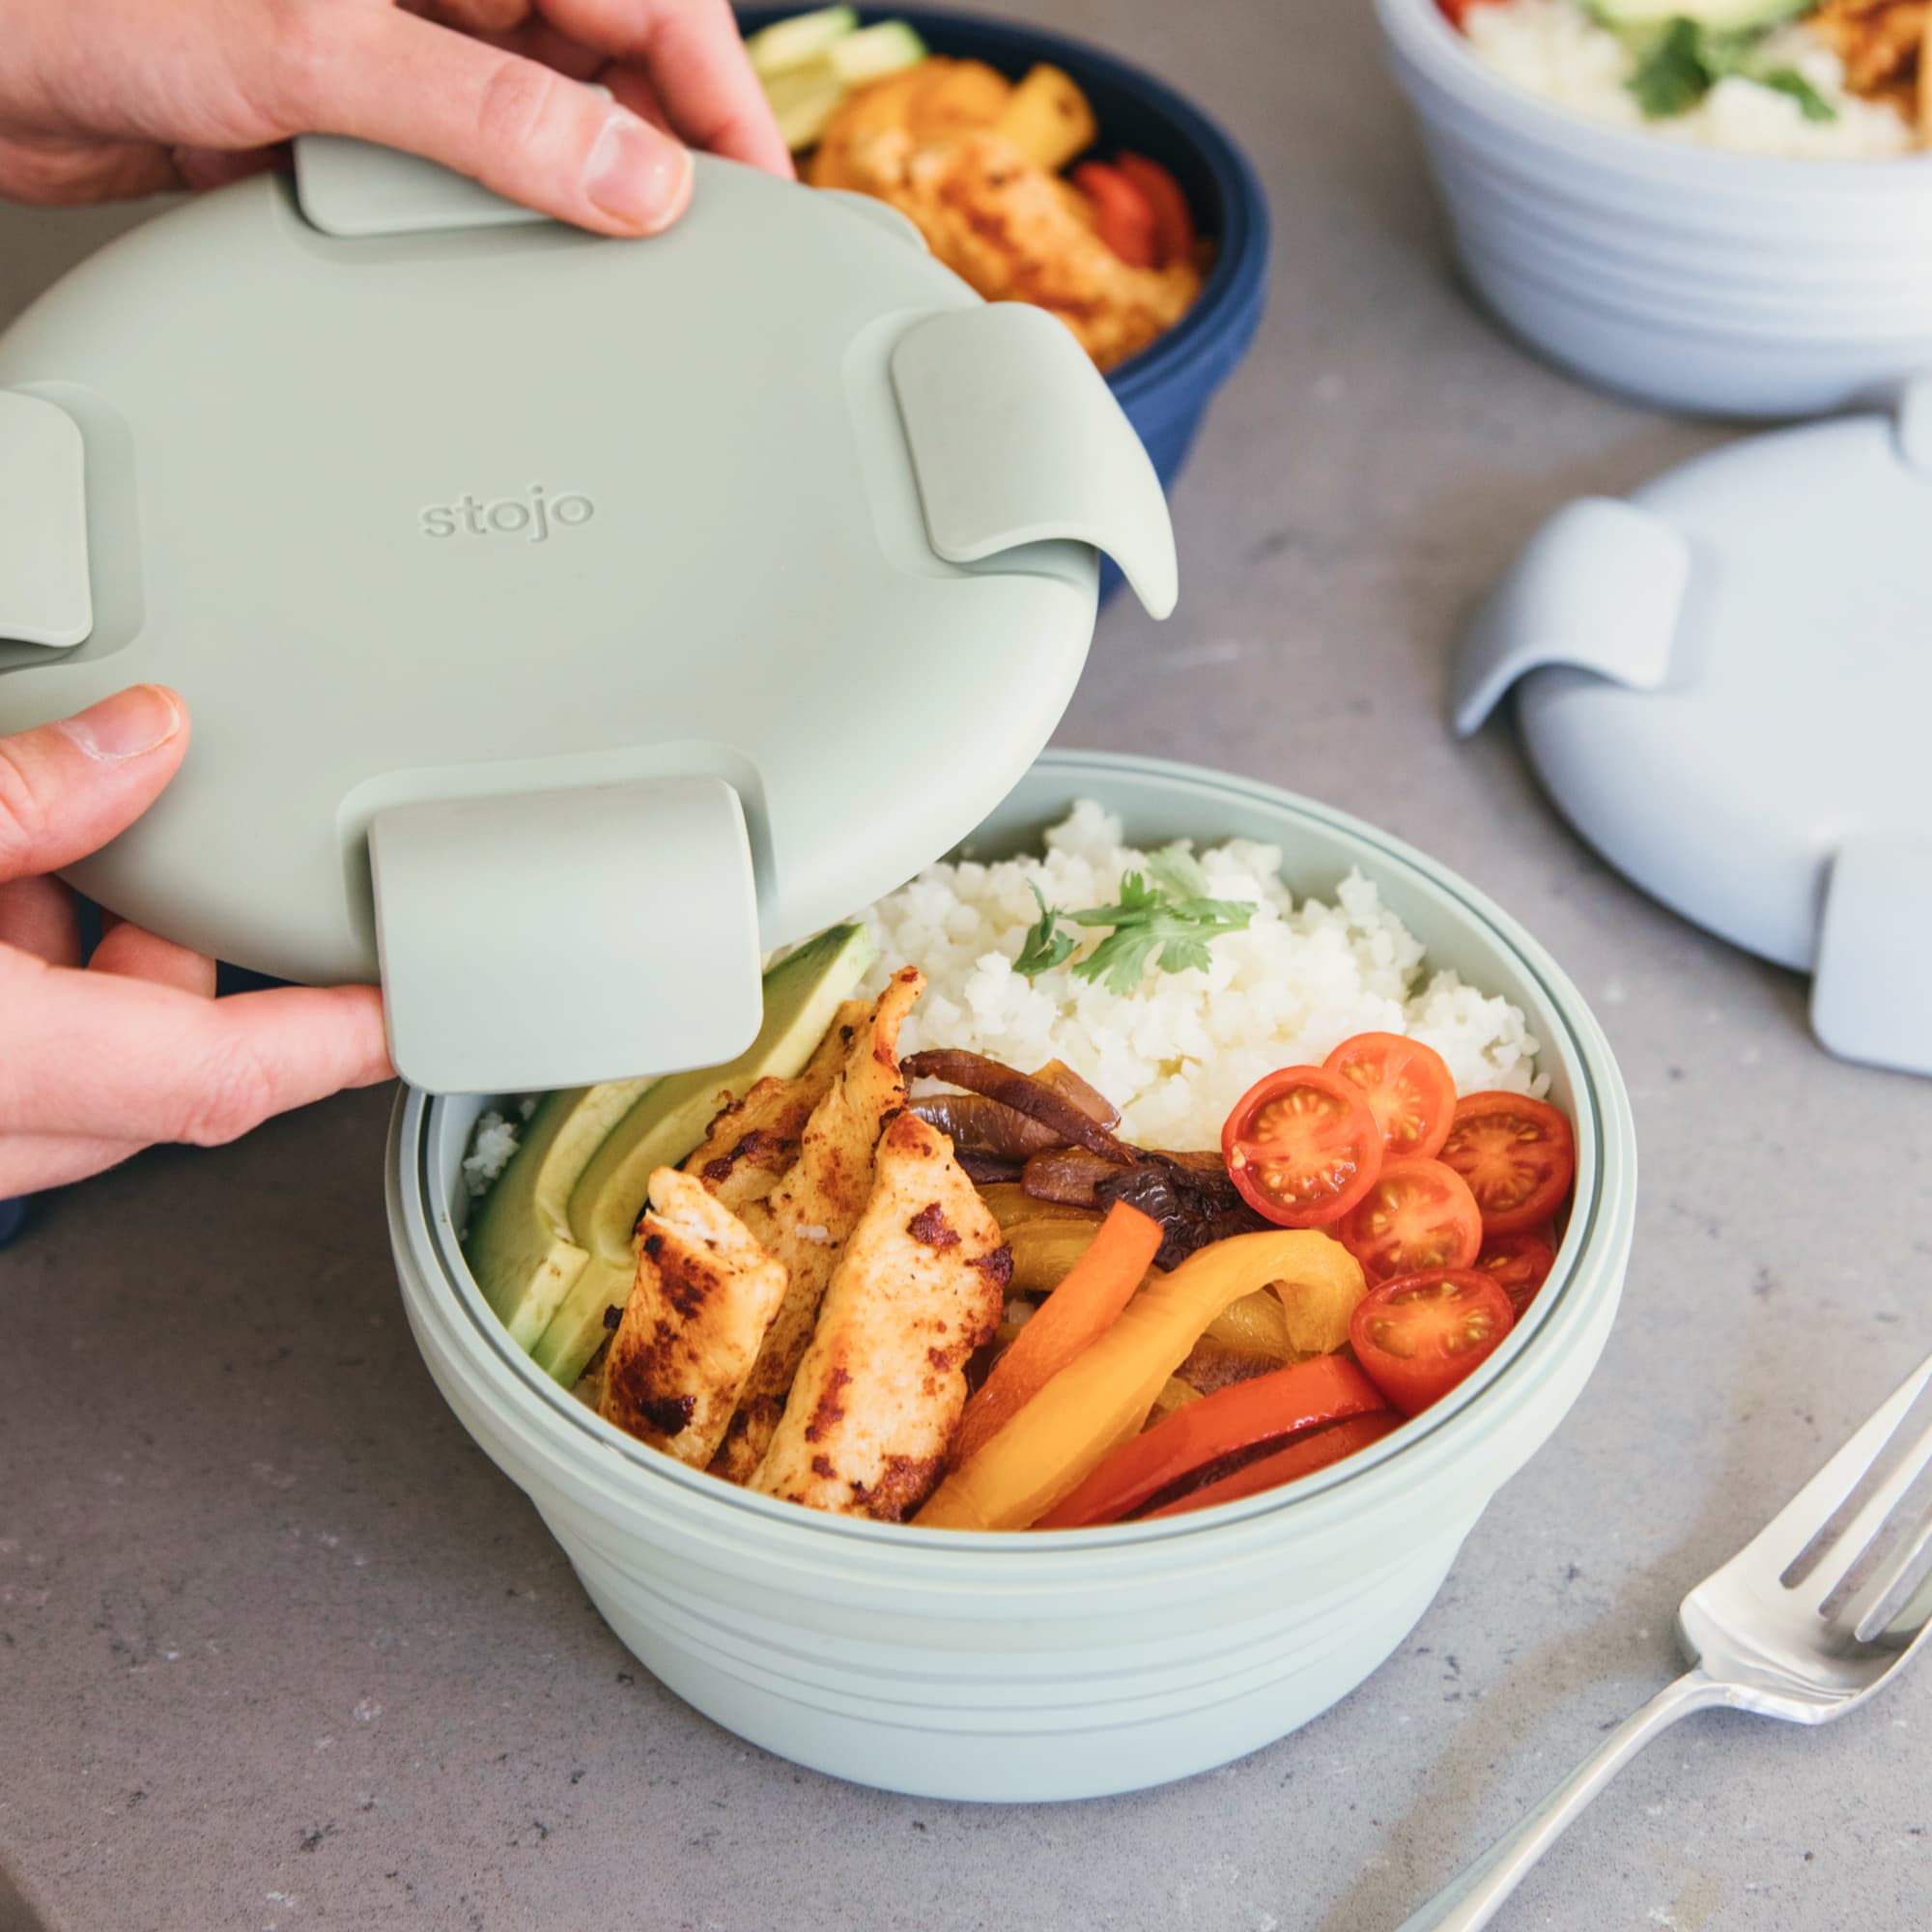 Stojo collapsible lunch box and bowl review - Reviewed